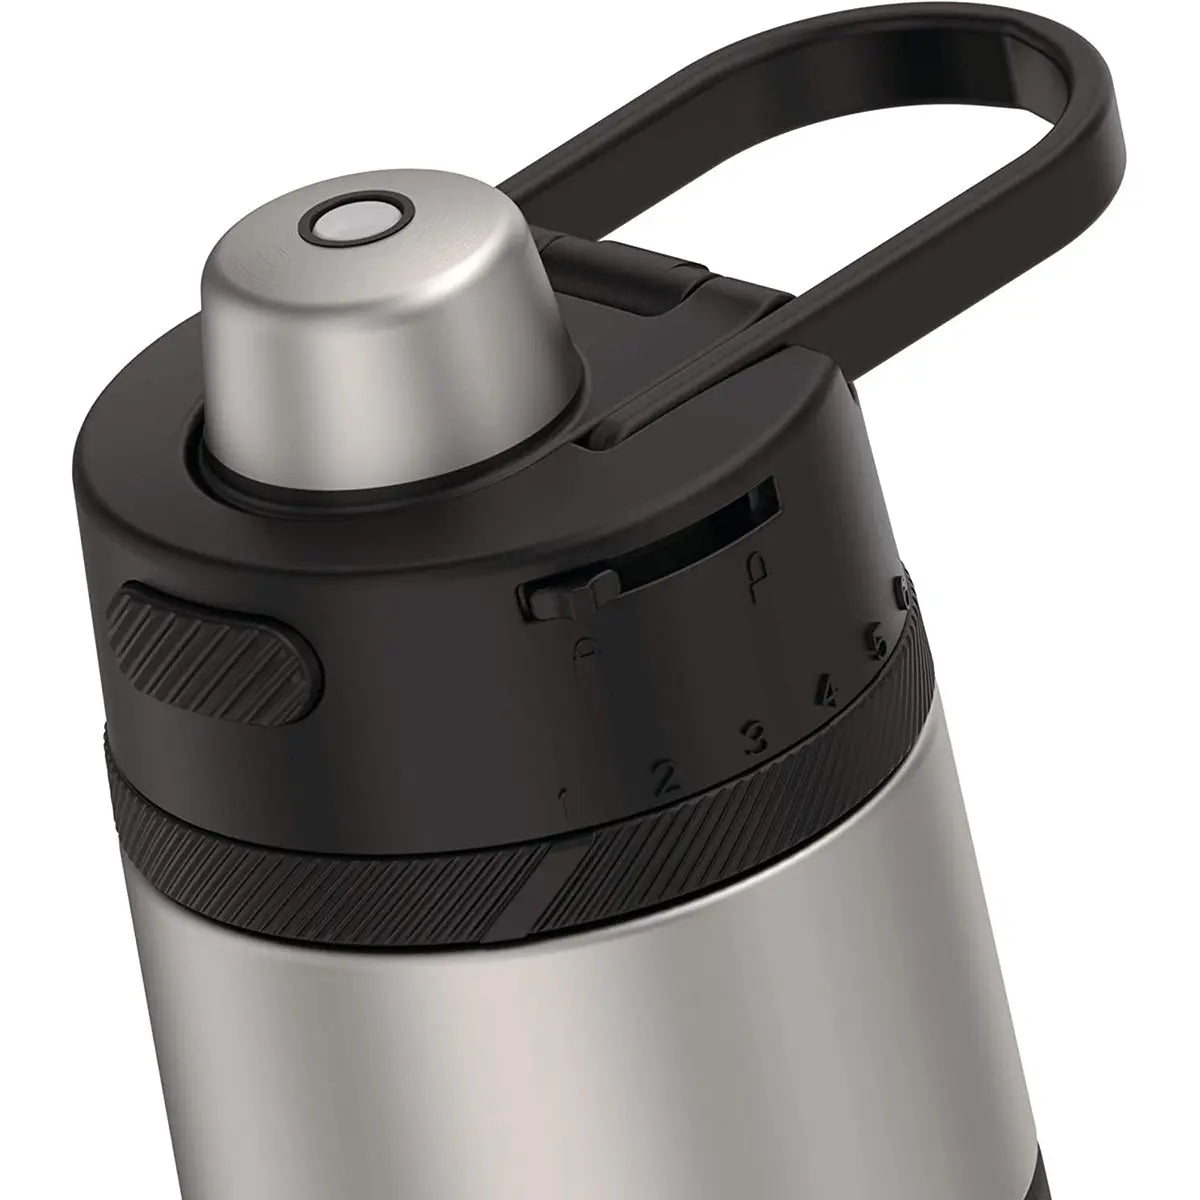 Thermos 18 oz Guardian Stainless Steel Water Bottle - Matte Steel/Espresso Black Thermos